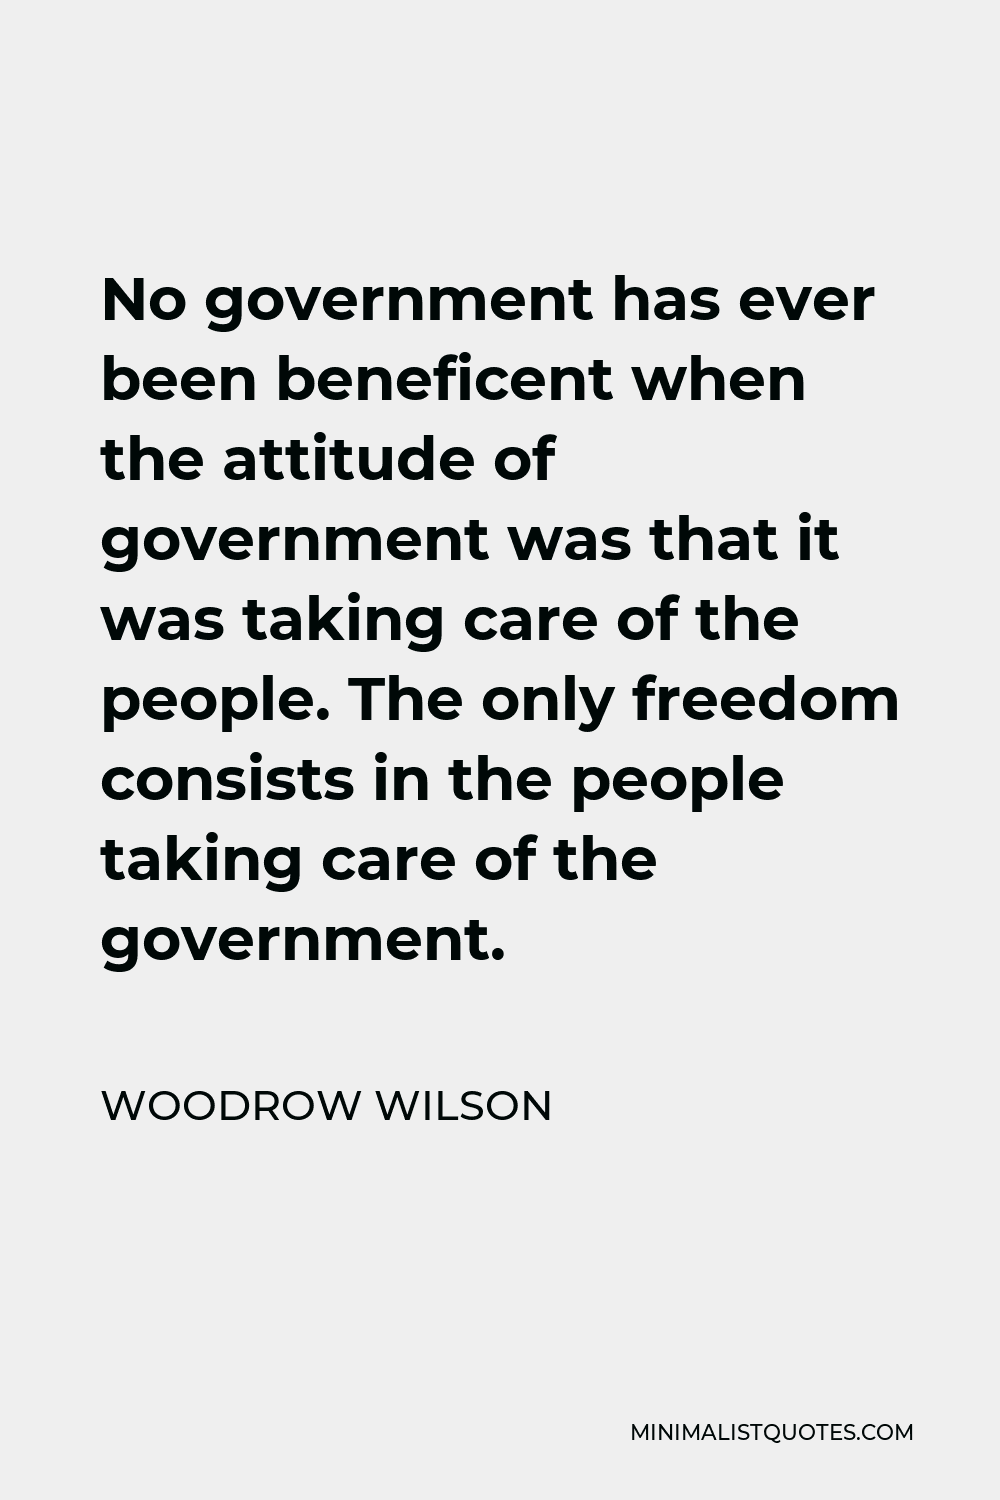 Woodrow Wilson Quote - No government has ever been beneficent when the attitude of government was that it was taking care of the people. The only freedom consists in the people taking care of the government.